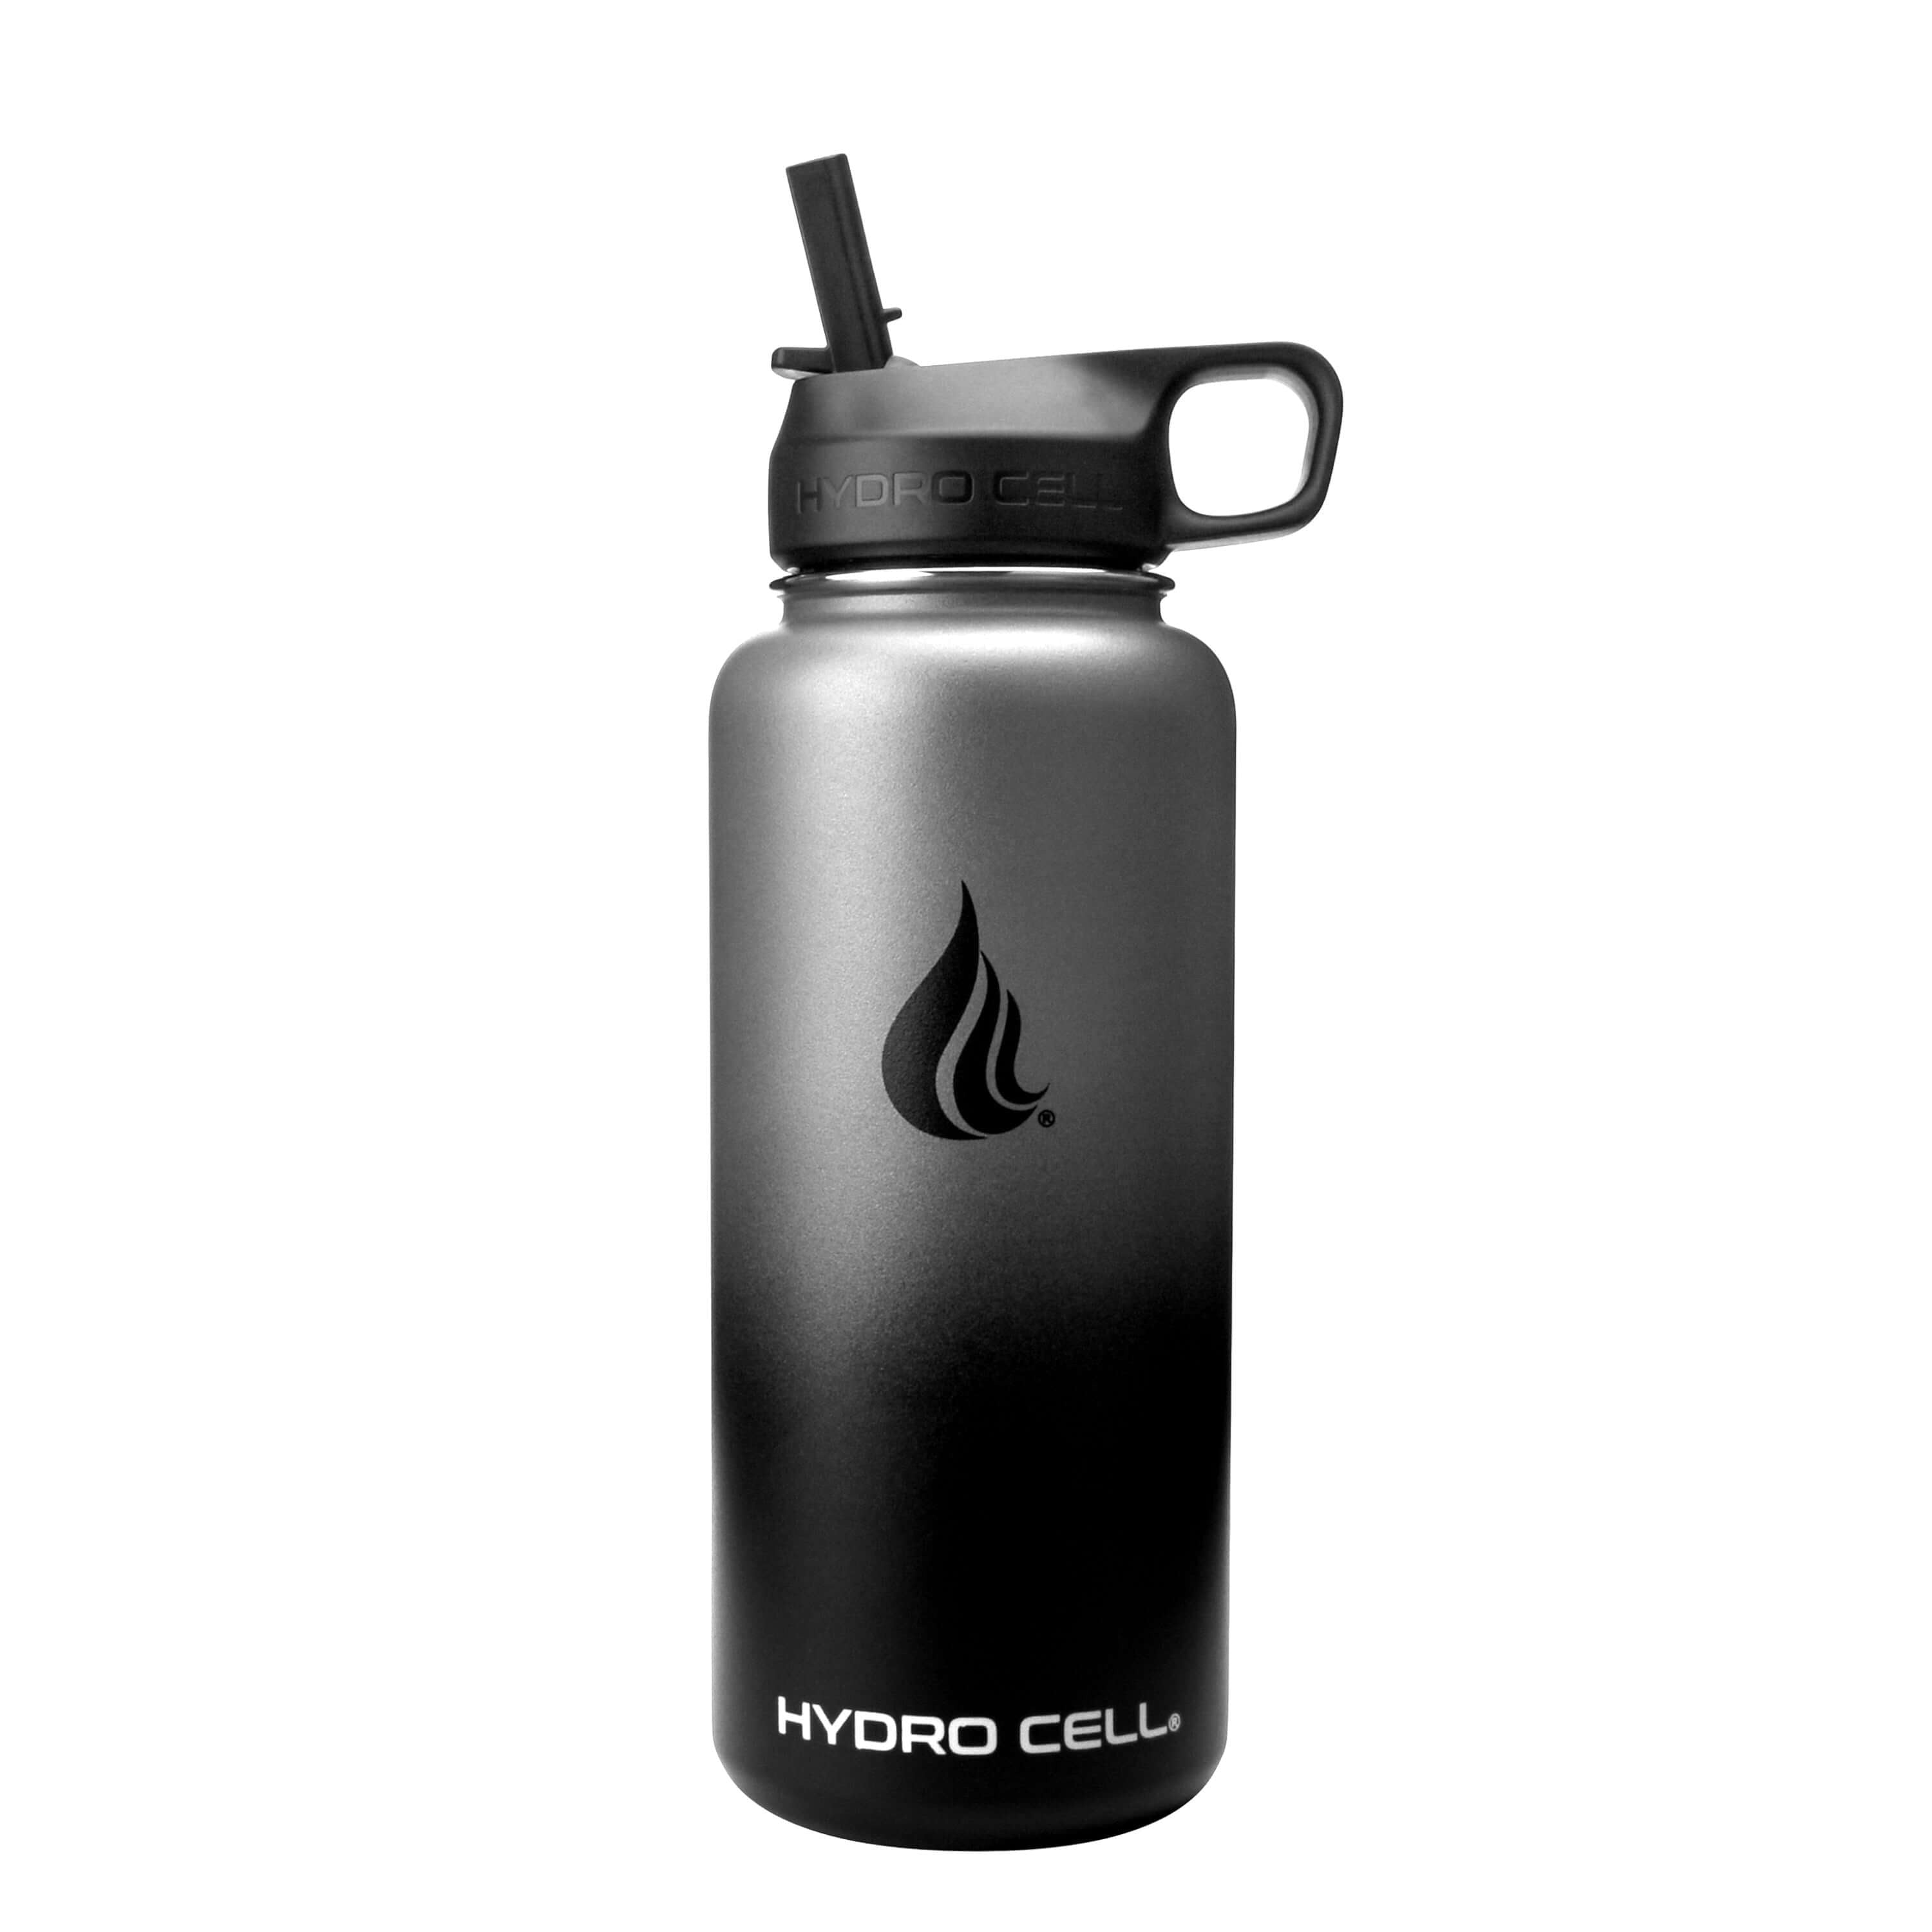 32oz (Fluid Ounces) Wide Mouth Hydro Cell Stainless Steel Water